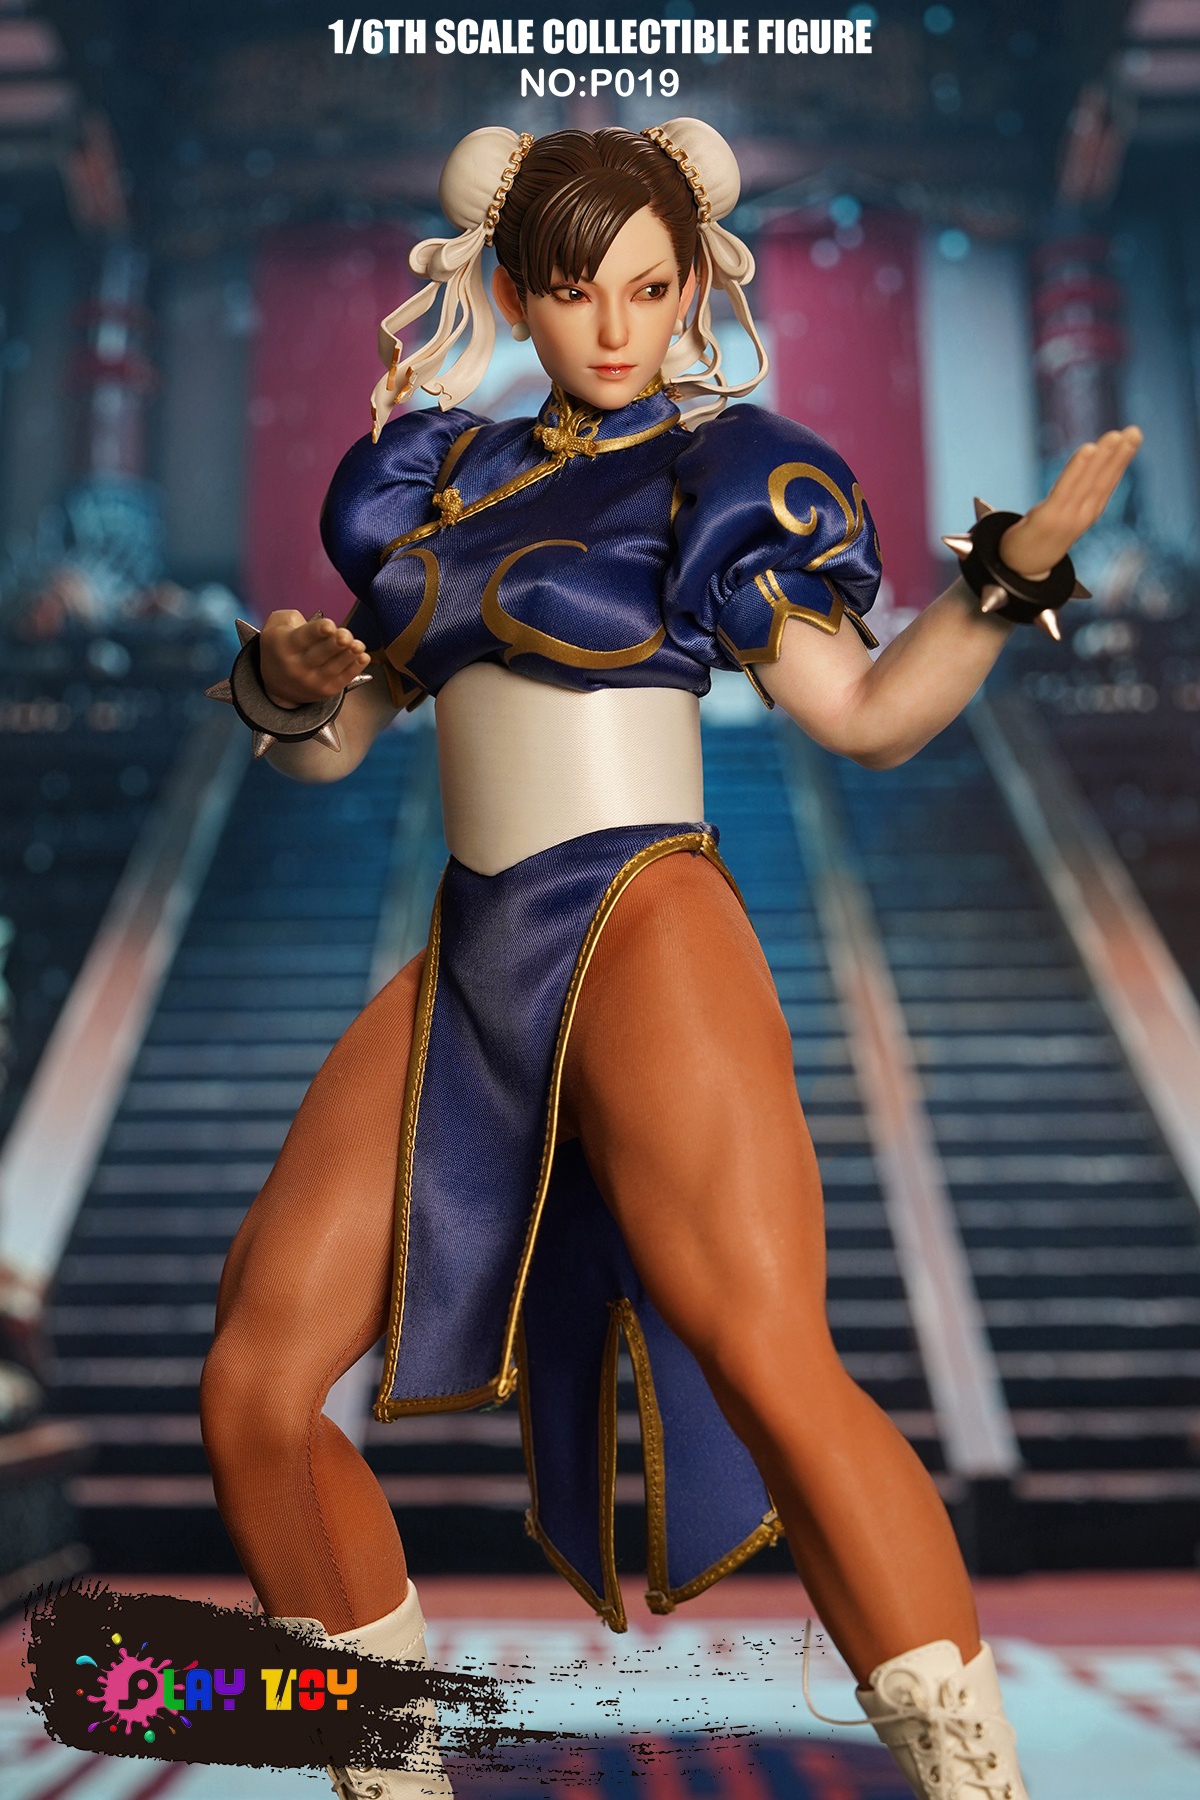 NEW PRODUCT: PLAY TOY - 1/6 Goddess of Fighting (NO:P019) 0211